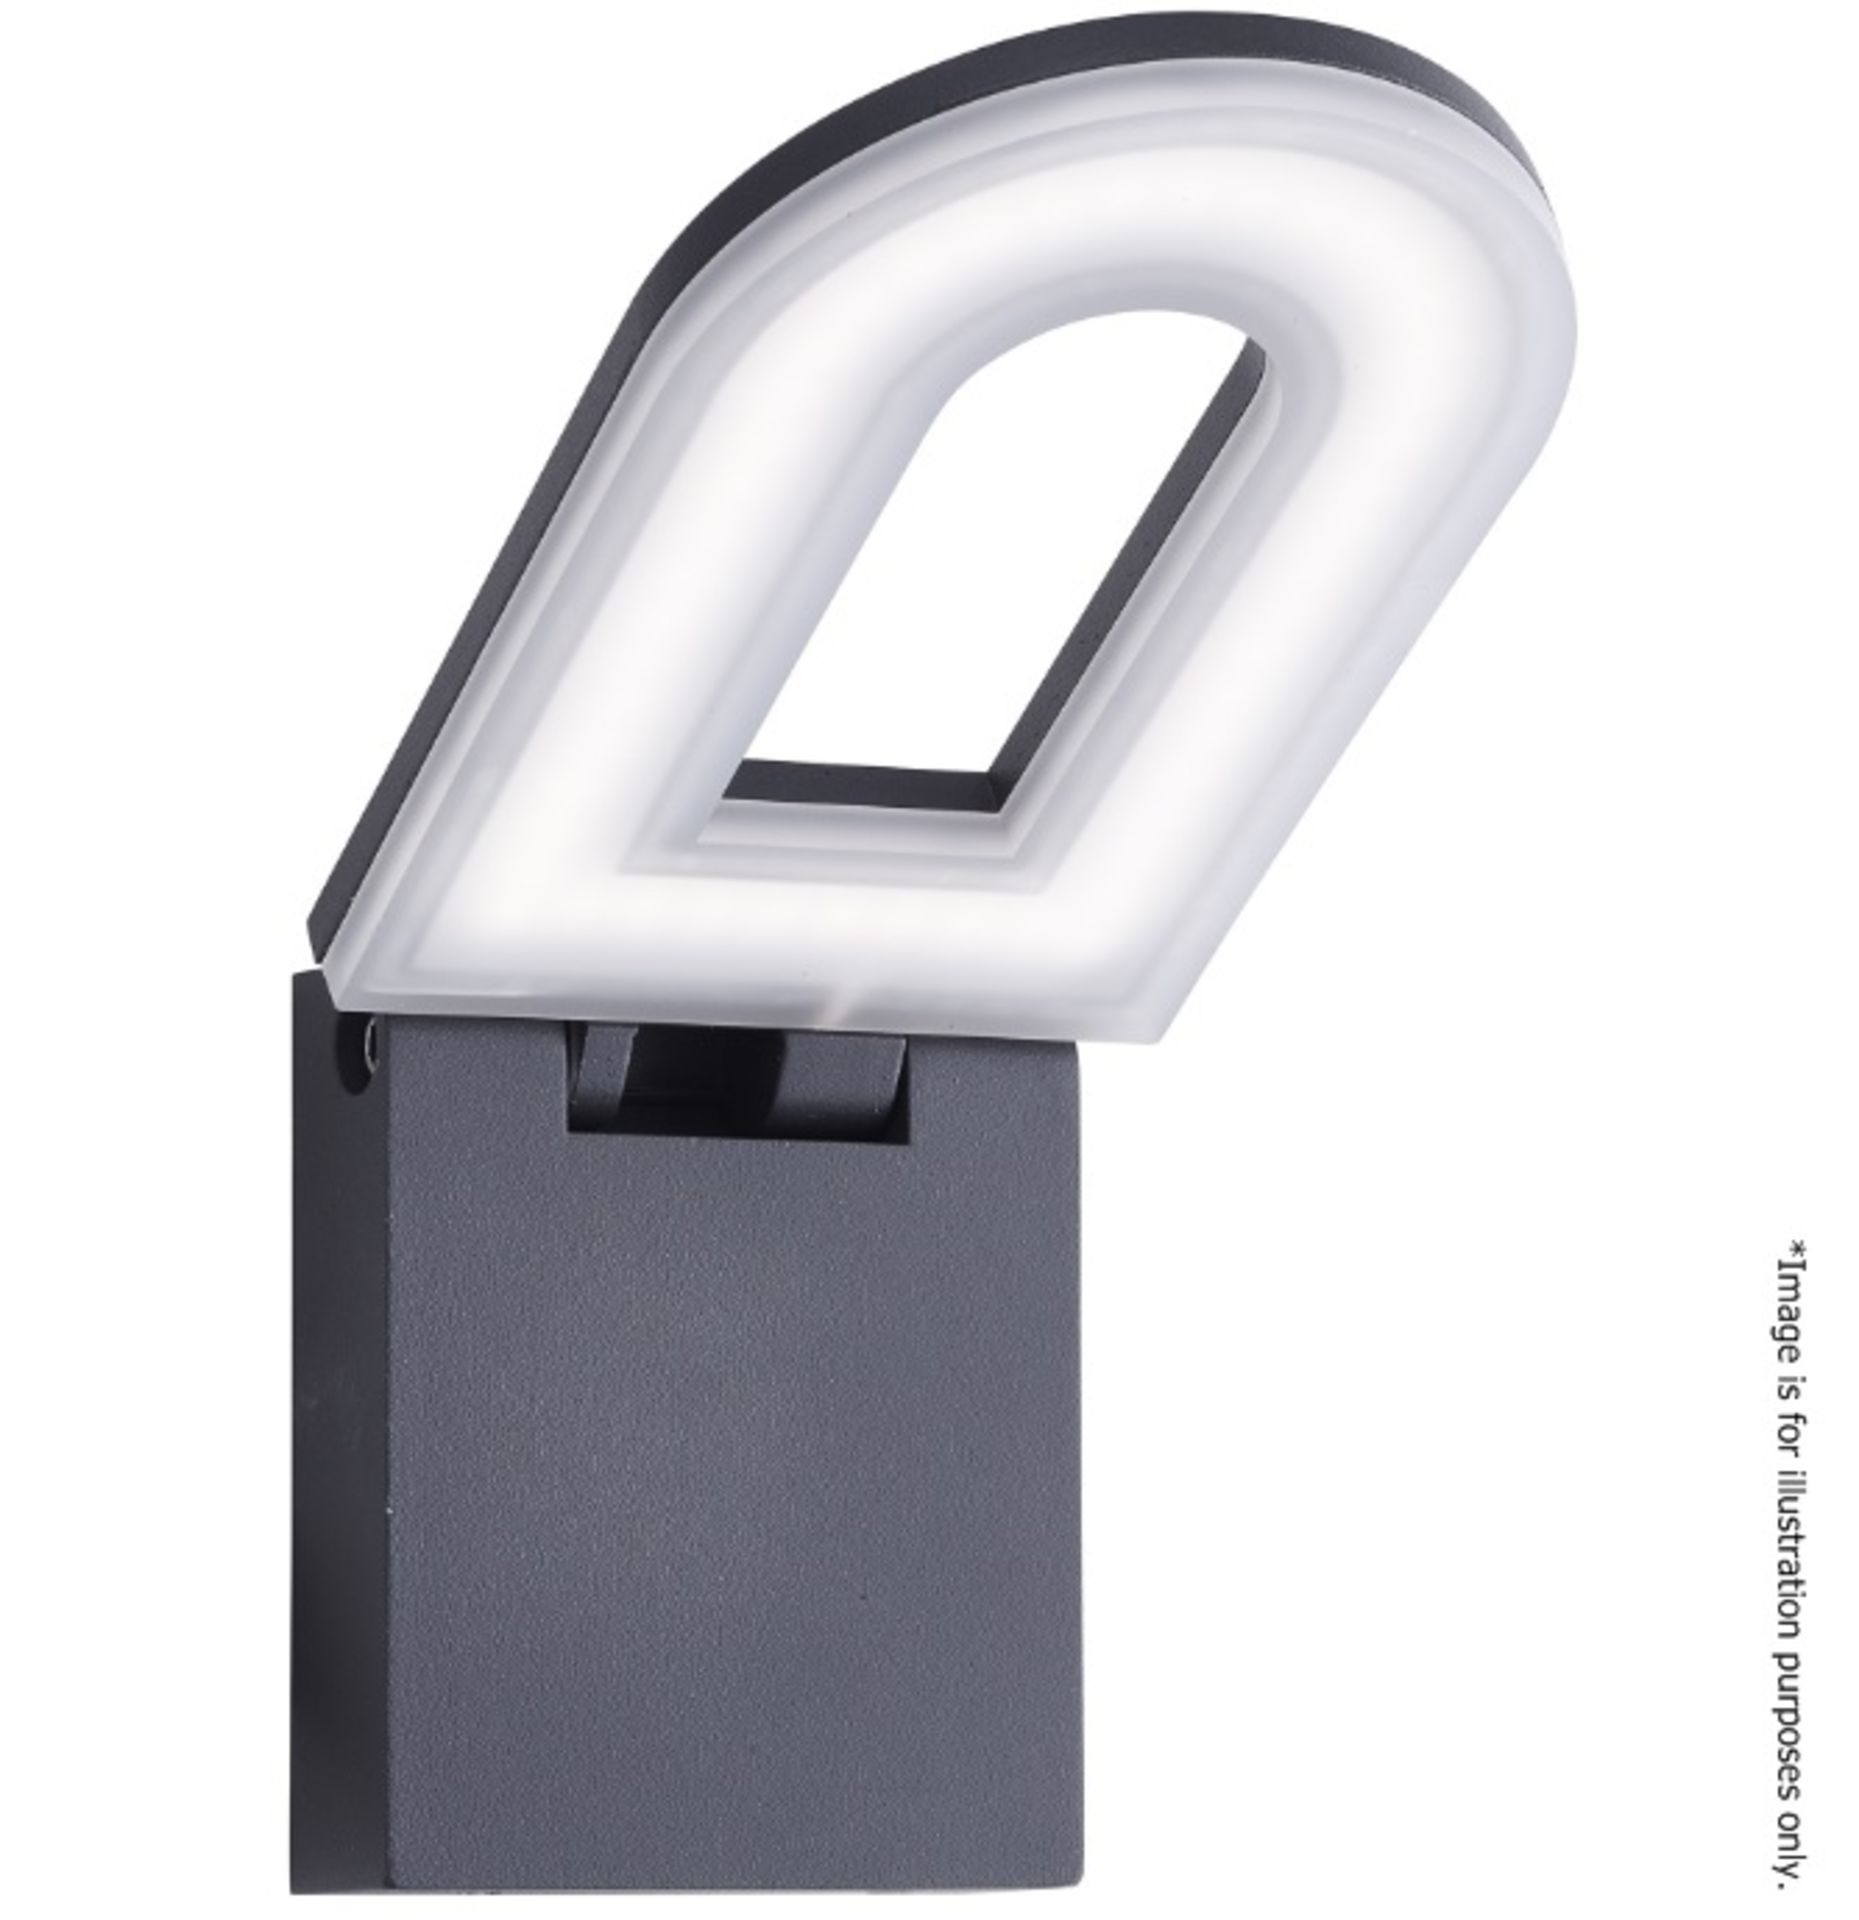 1 x Aluminium IP44 Grey Led Outdoor Wall Light Frosted Diffuser - Ex Display - RRP £56.40